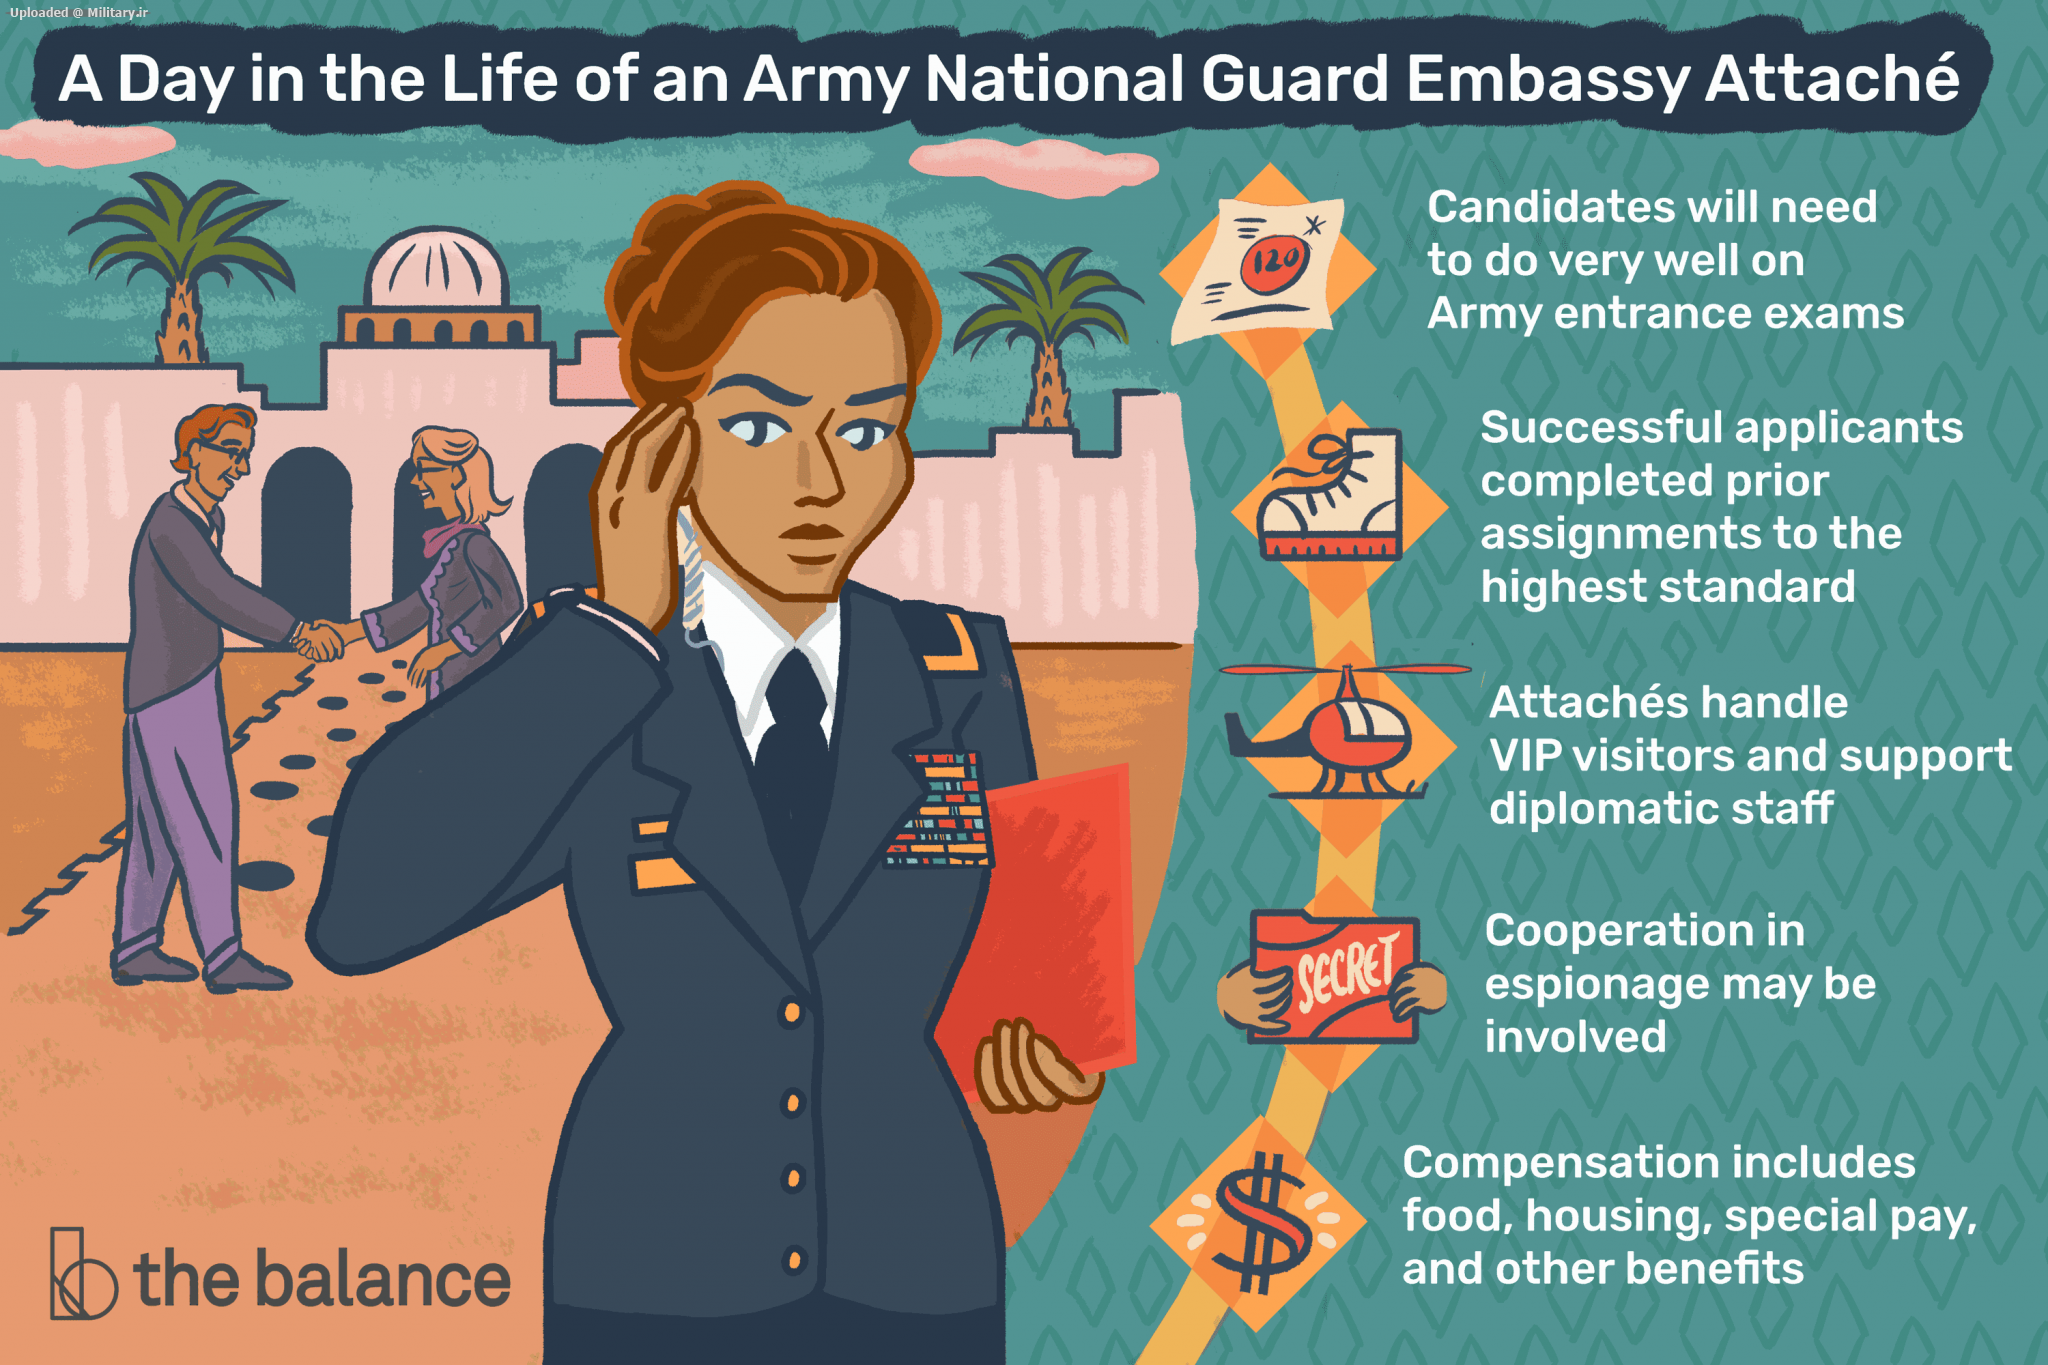 career-profile-army-attache-noncommissioned-officer-2356454_final-3a1d2eac832346cc94c740799fc35d4c.png